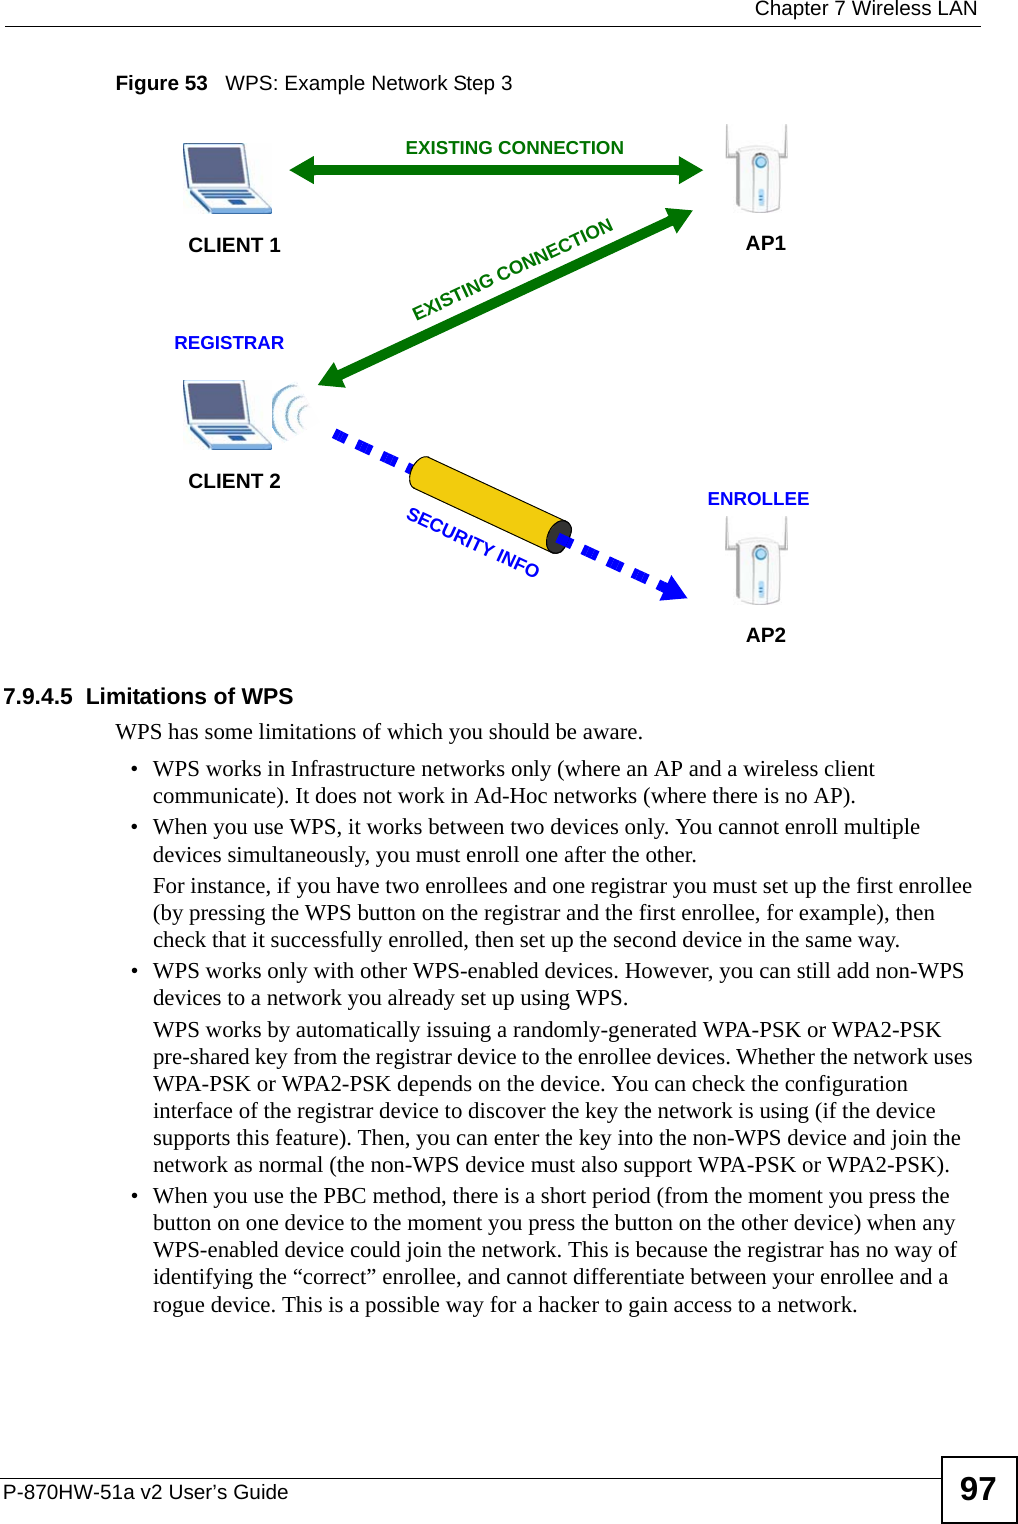  Chapter 7 Wireless LANP-870HW-51a v2 User’s Guide 97Figure 53   WPS: Example Network Step 37.9.4.5  Limitations of WPSWPS has some limitations of which you should be aware. • WPS works in Infrastructure networks only (where an AP and a wireless client communicate). It does not work in Ad-Hoc networks (where there is no AP).• When you use WPS, it works between two devices only. You cannot enroll multiple devices simultaneously, you must enroll one after the other. For instance, if you have two enrollees and one registrar you must set up the first enrollee (by pressing the WPS button on the registrar and the first enrollee, for example), then check that it successfully enrolled, then set up the second device in the same way.• WPS works only with other WPS-enabled devices. However, you can still add non-WPS devices to a network you already set up using WPS. WPS works by automatically issuing a randomly-generated WPA-PSK or WPA2-PSK pre-shared key from the registrar device to the enrollee devices. Whether the network uses WPA-PSK or WPA2-PSK depends on the device. You can check the configuration interface of the registrar device to discover the key the network is using (if the device supports this feature). Then, you can enter the key into the non-WPS device and join the network as normal (the non-WPS device must also support WPA-PSK or WPA2-PSK).• When you use the PBC method, there is a short period (from the moment you press the button on one device to the moment you press the button on the other device) when any WPS-enabled device could join the network. This is because the registrar has no way of identifying the “correct” enrollee, and cannot differentiate between your enrollee and a rogue device. This is a possible way for a hacker to gain access to a network.CLIENT 1 AP1REGISTRARCLIENT 2EXISTING CONNECTIONSECURITY INFOENROLLEEAP2EXISTING CONNECTION